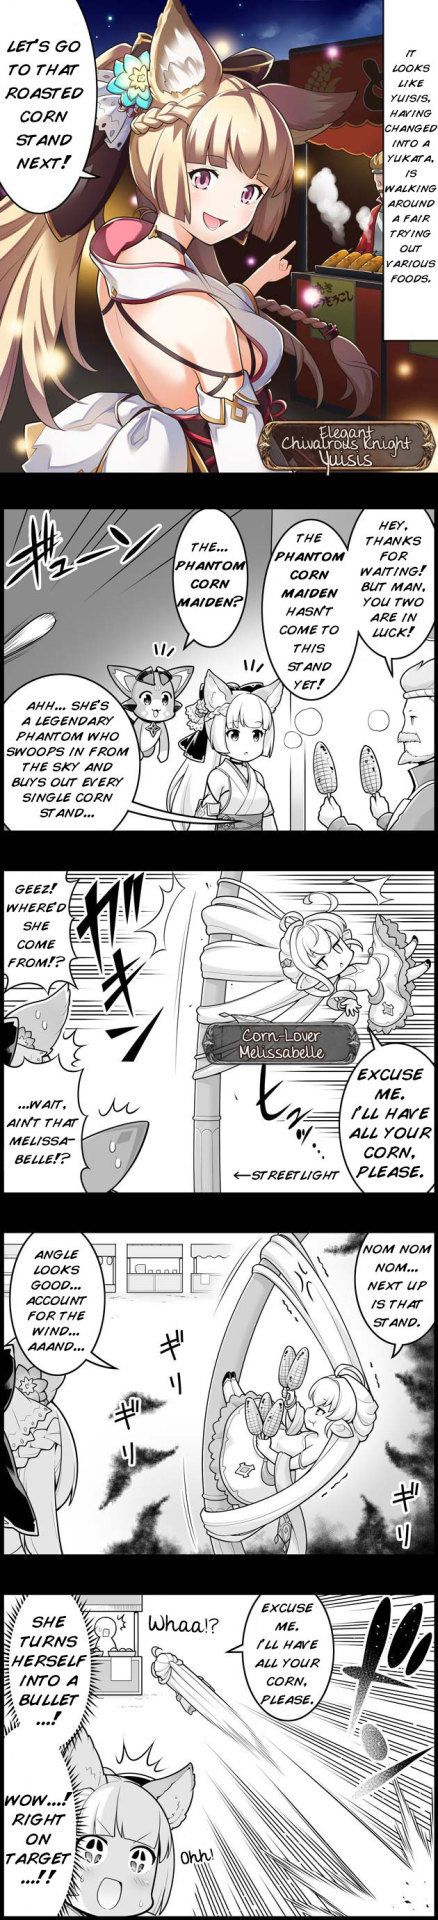 Grand Blues! Ch. 1095 At the Fair with Yuisis